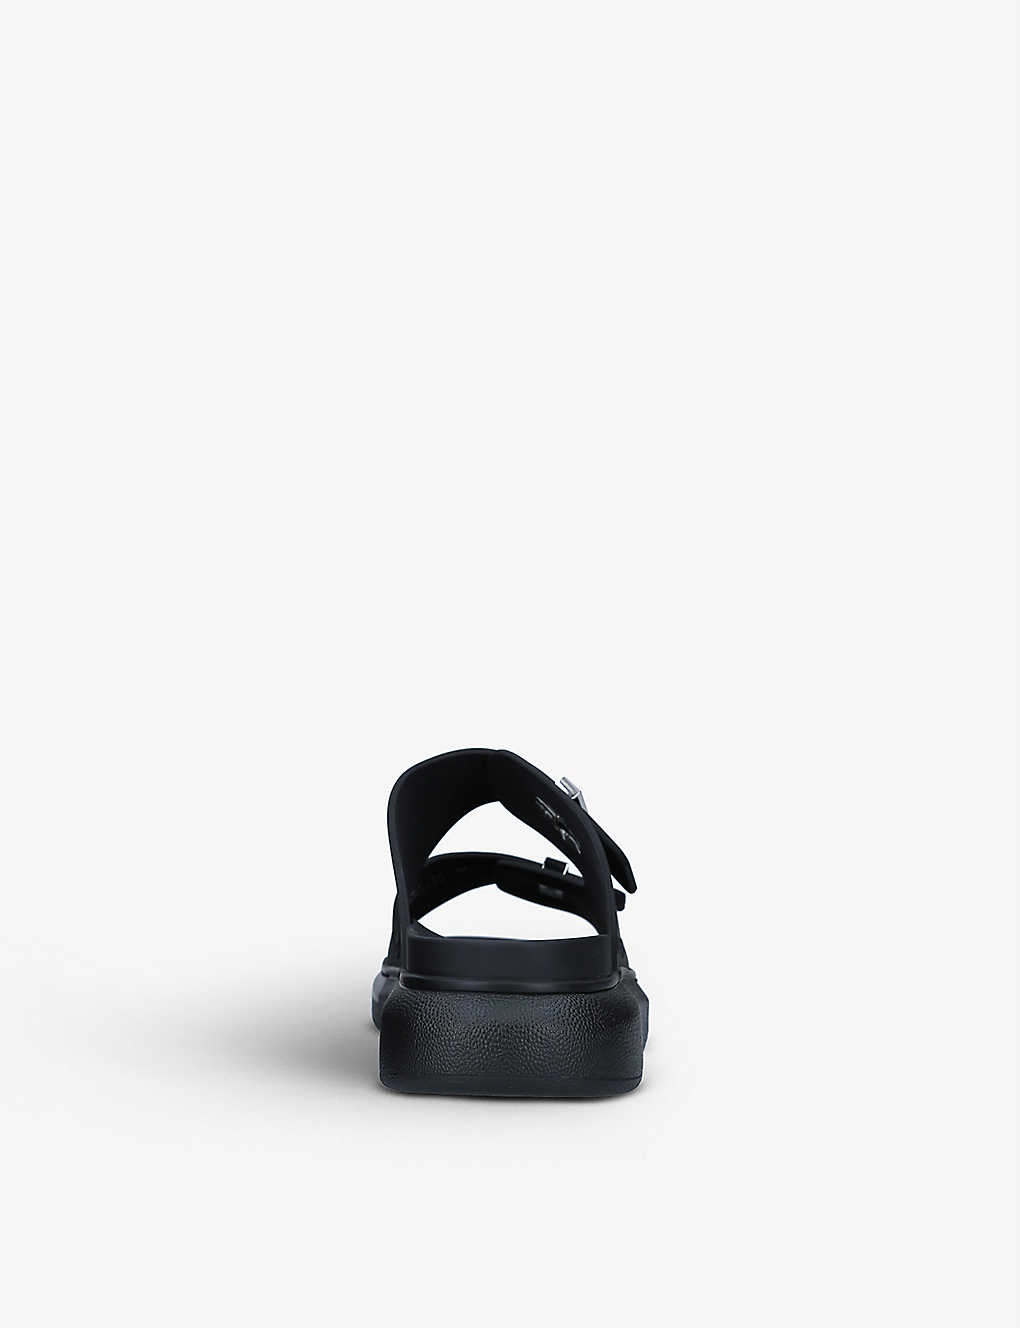 Hybrid double-buckle leather sandals - 4